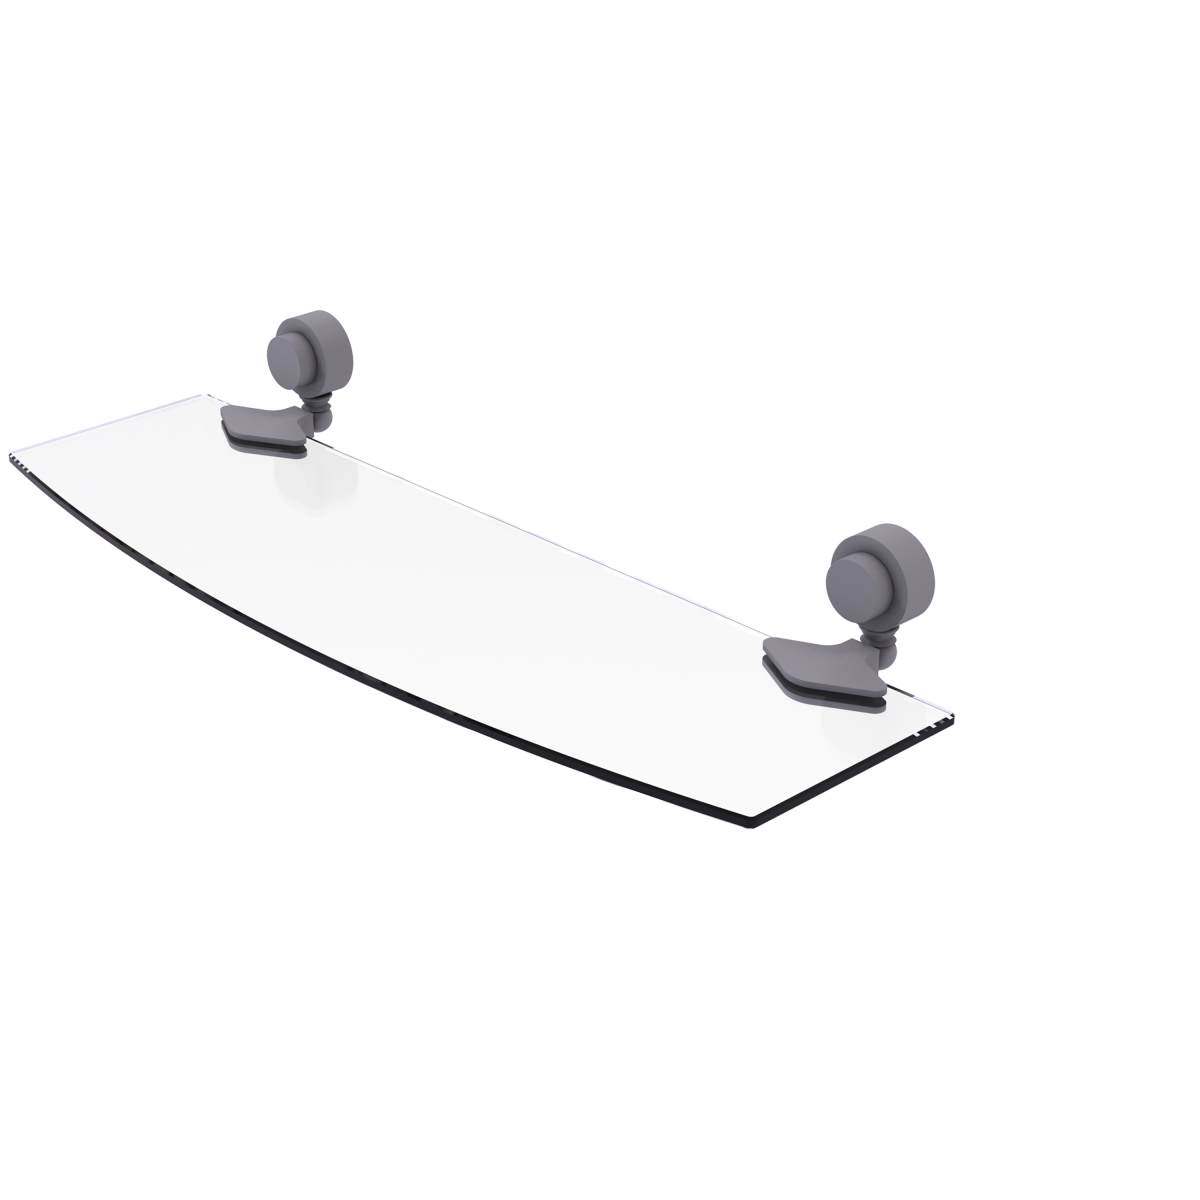 Picture of Allied Brass 433-18-GYM 18 in. Venus Collection Glass Shelf, Matte Gray